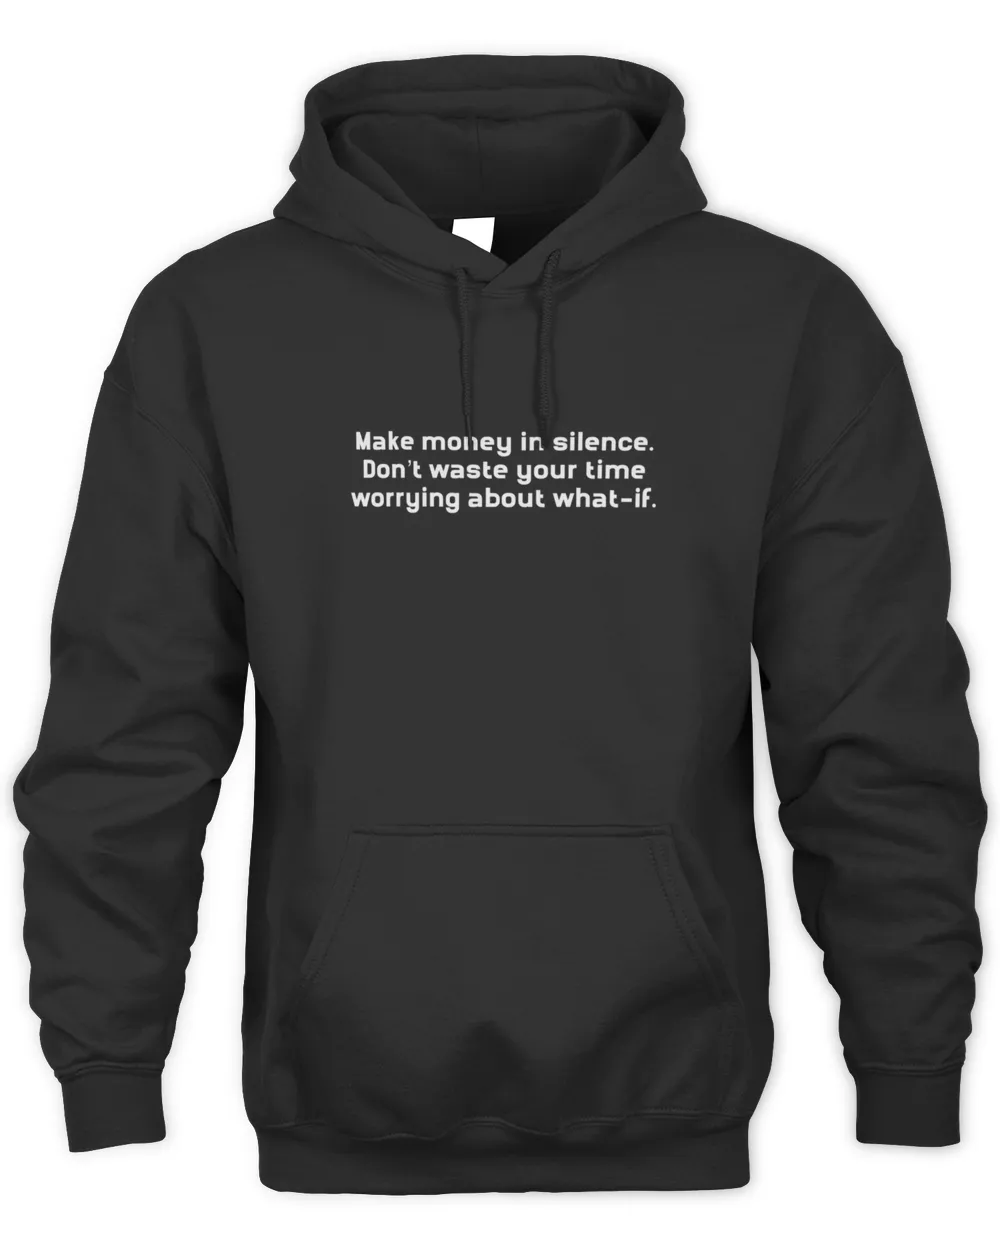 Make money in silence do not waste your time T-Shirt